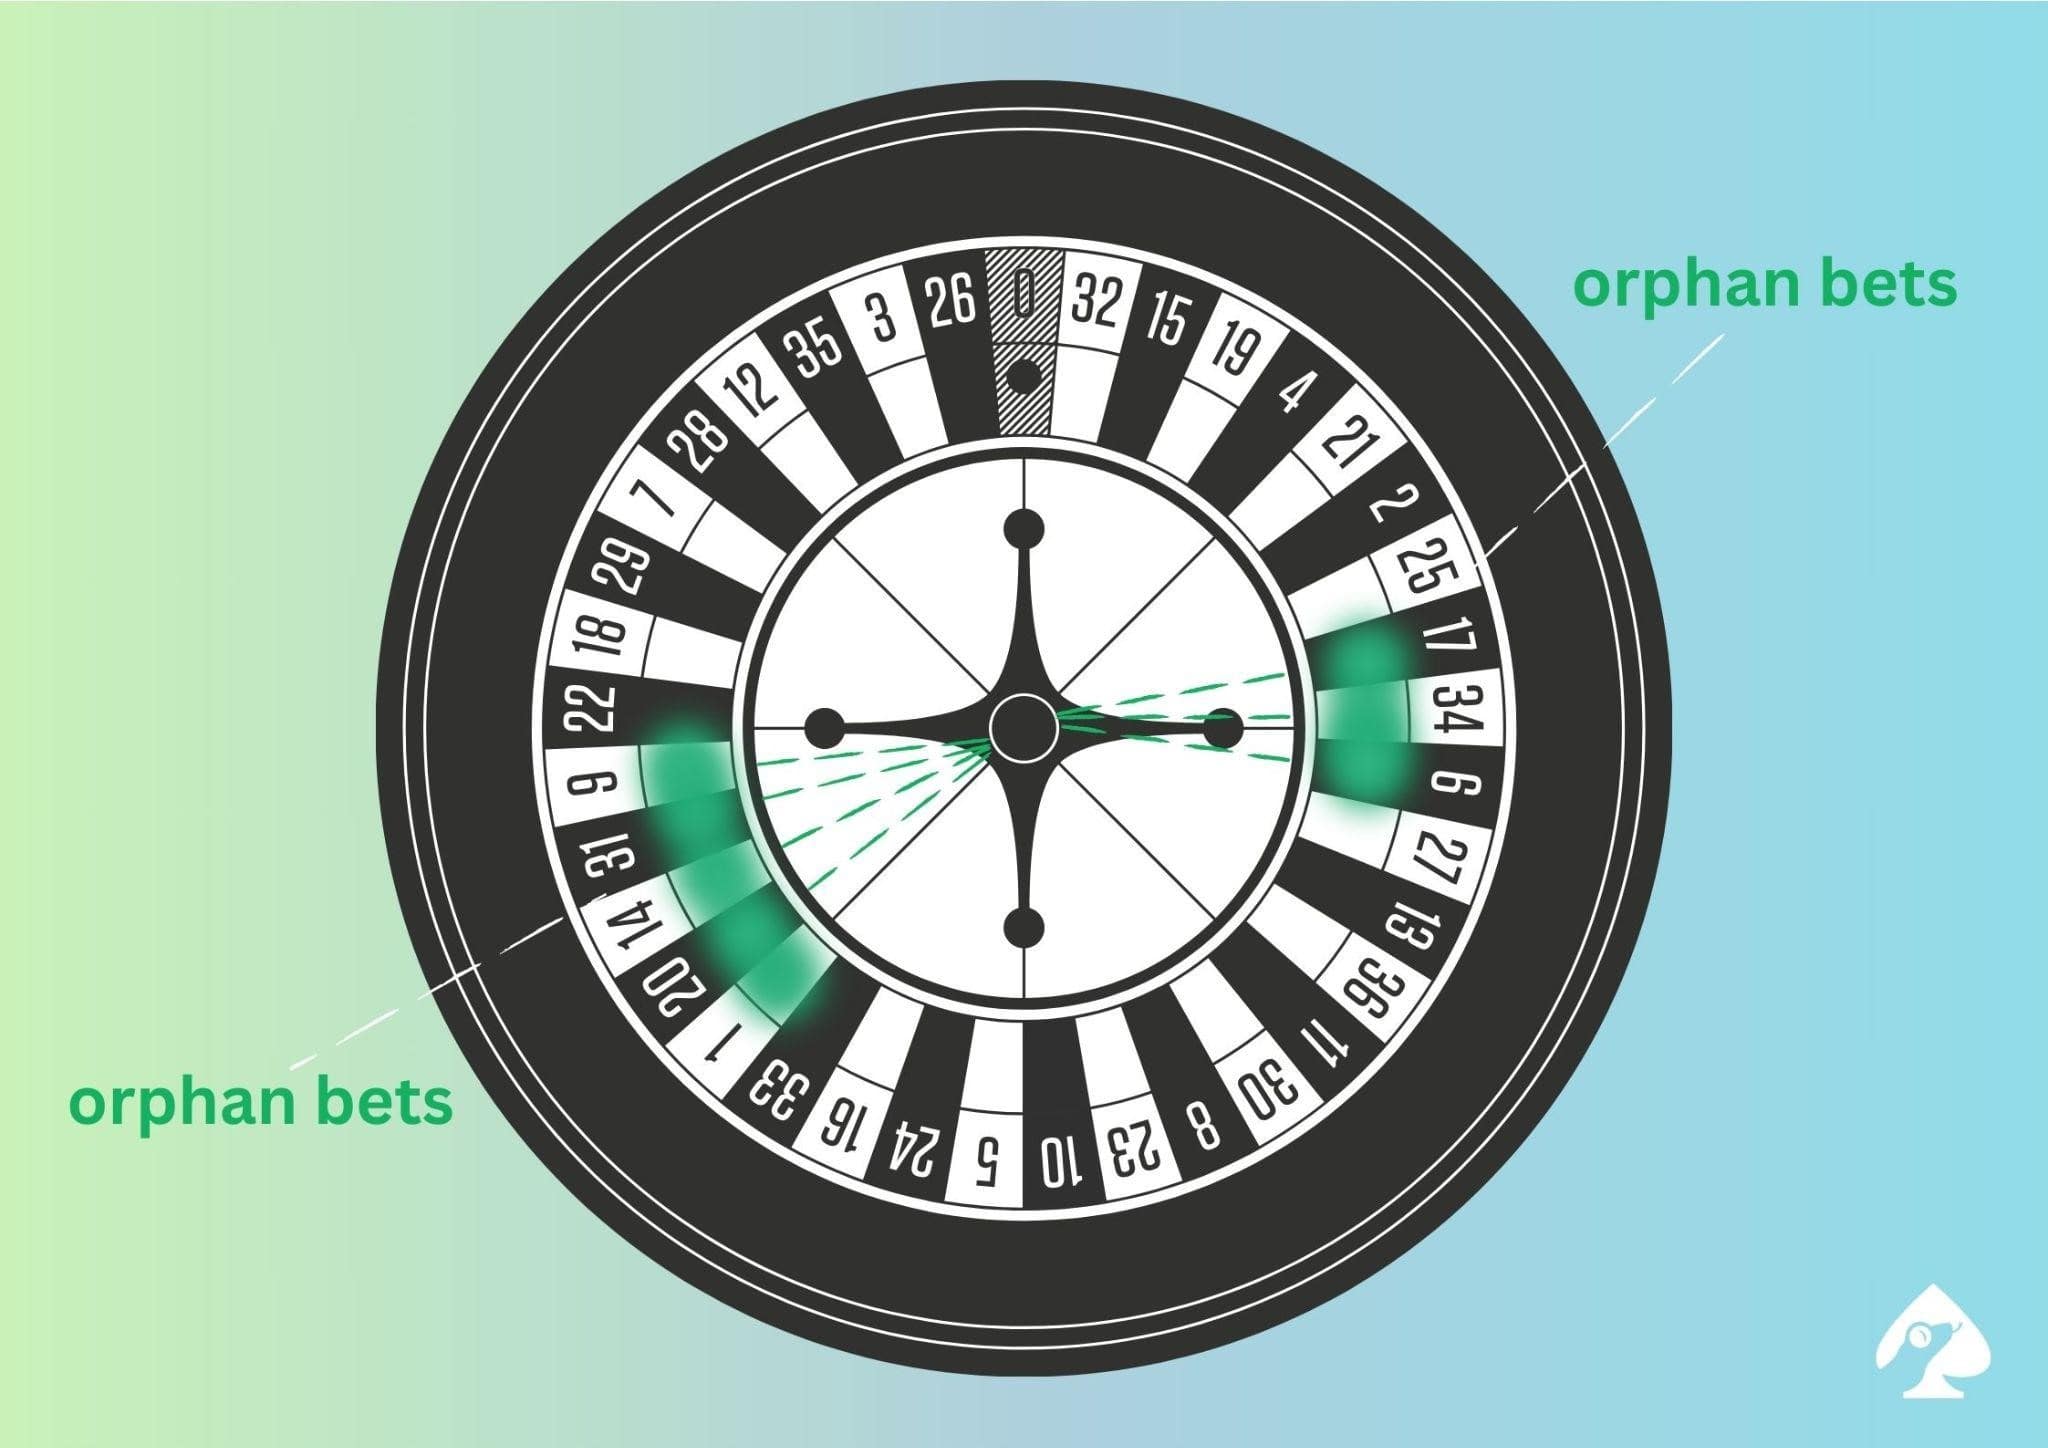 Orphan bets roulette layout